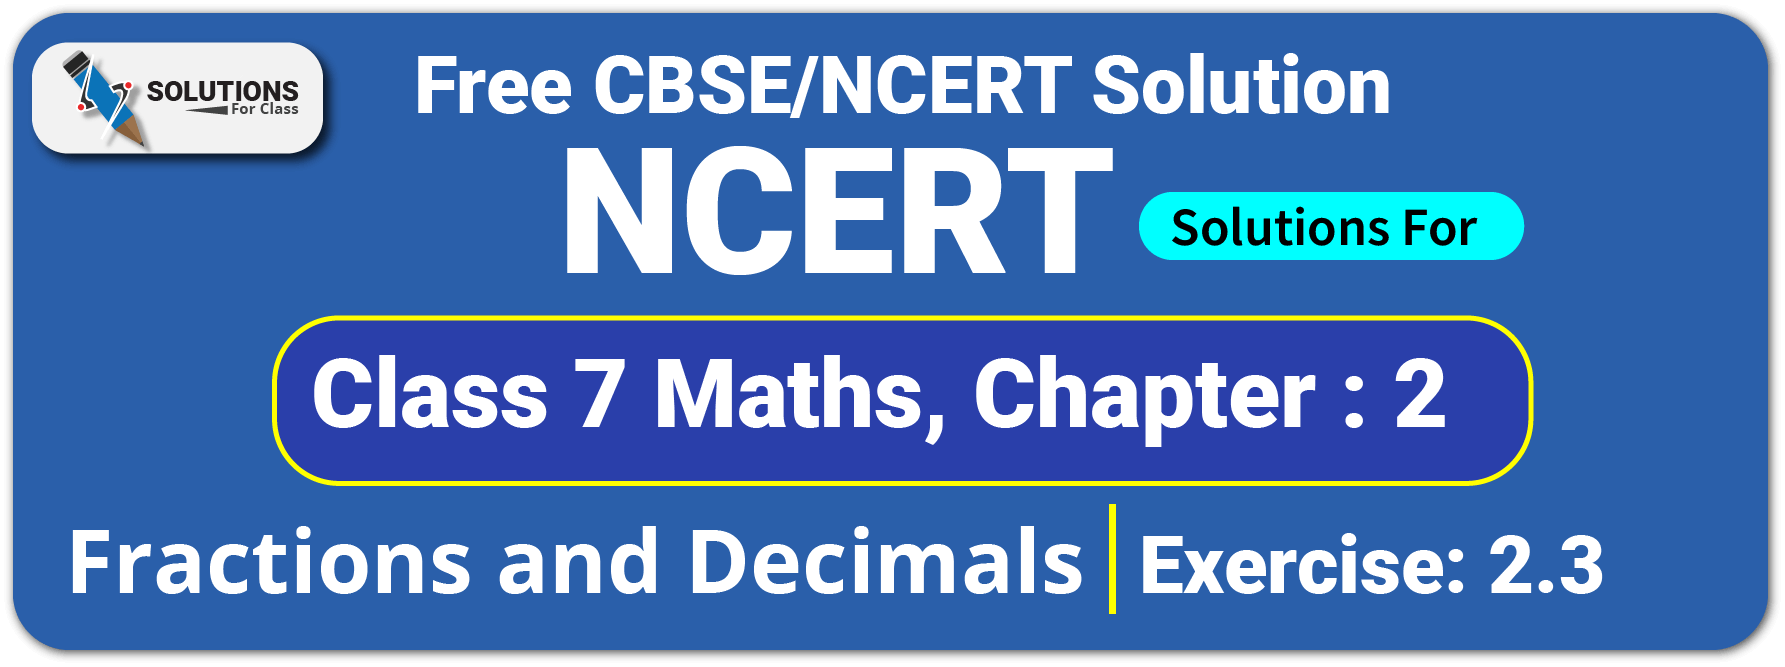 NCERT Solutions For Class 7 Chapter 2, Fractions and Decimals, Exercise 2.3